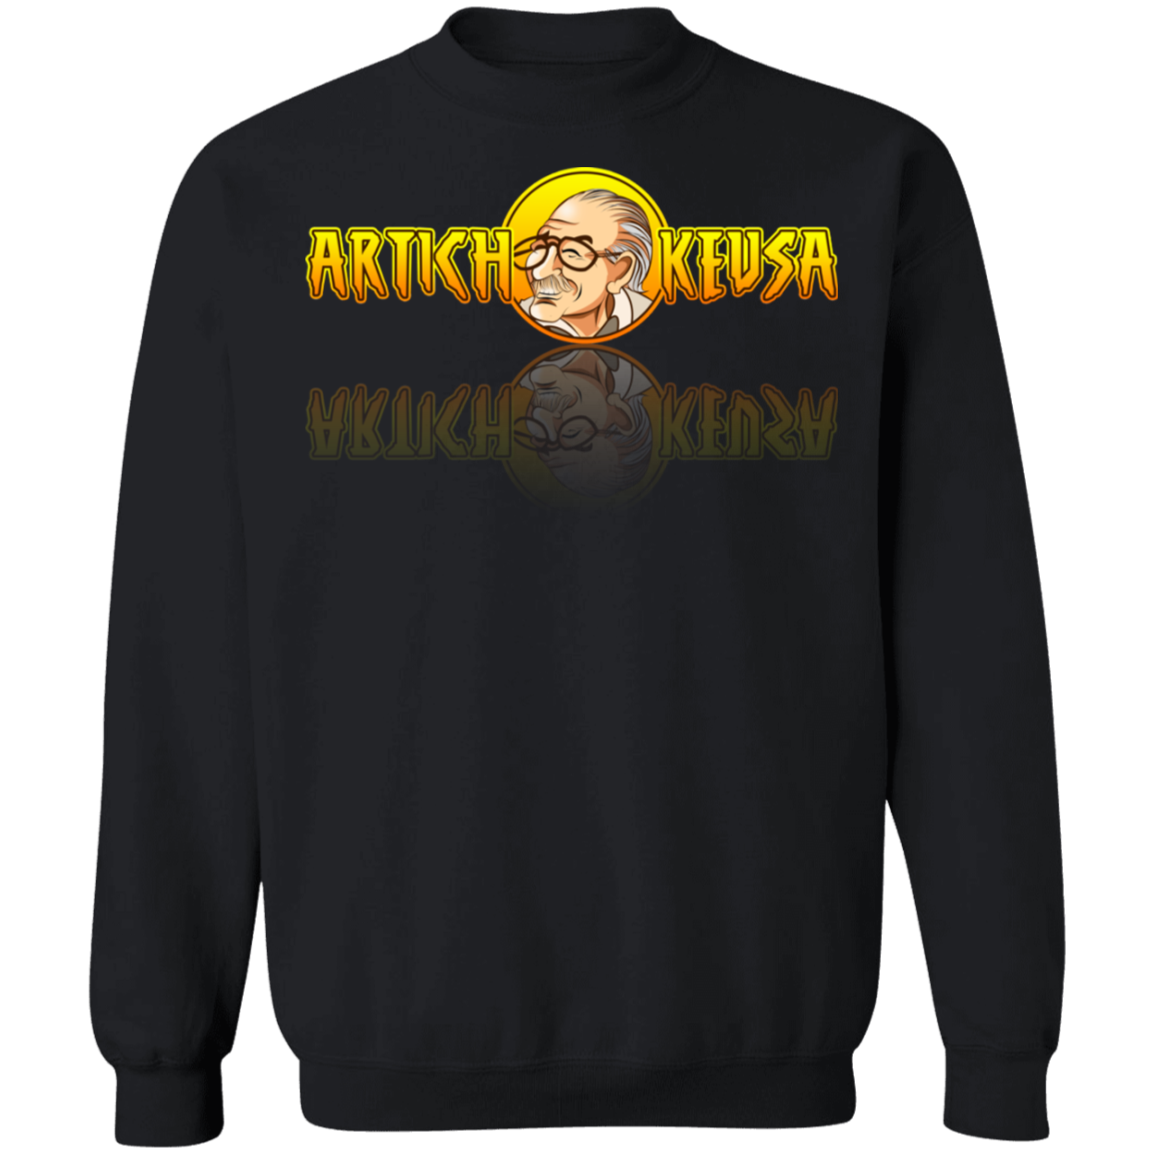 ArtichokeUSA Character and Font design. Stan Lee Thank You Fan Art. Let's Create Your Own Design Today. Crewneck Pullover Sweatshirt